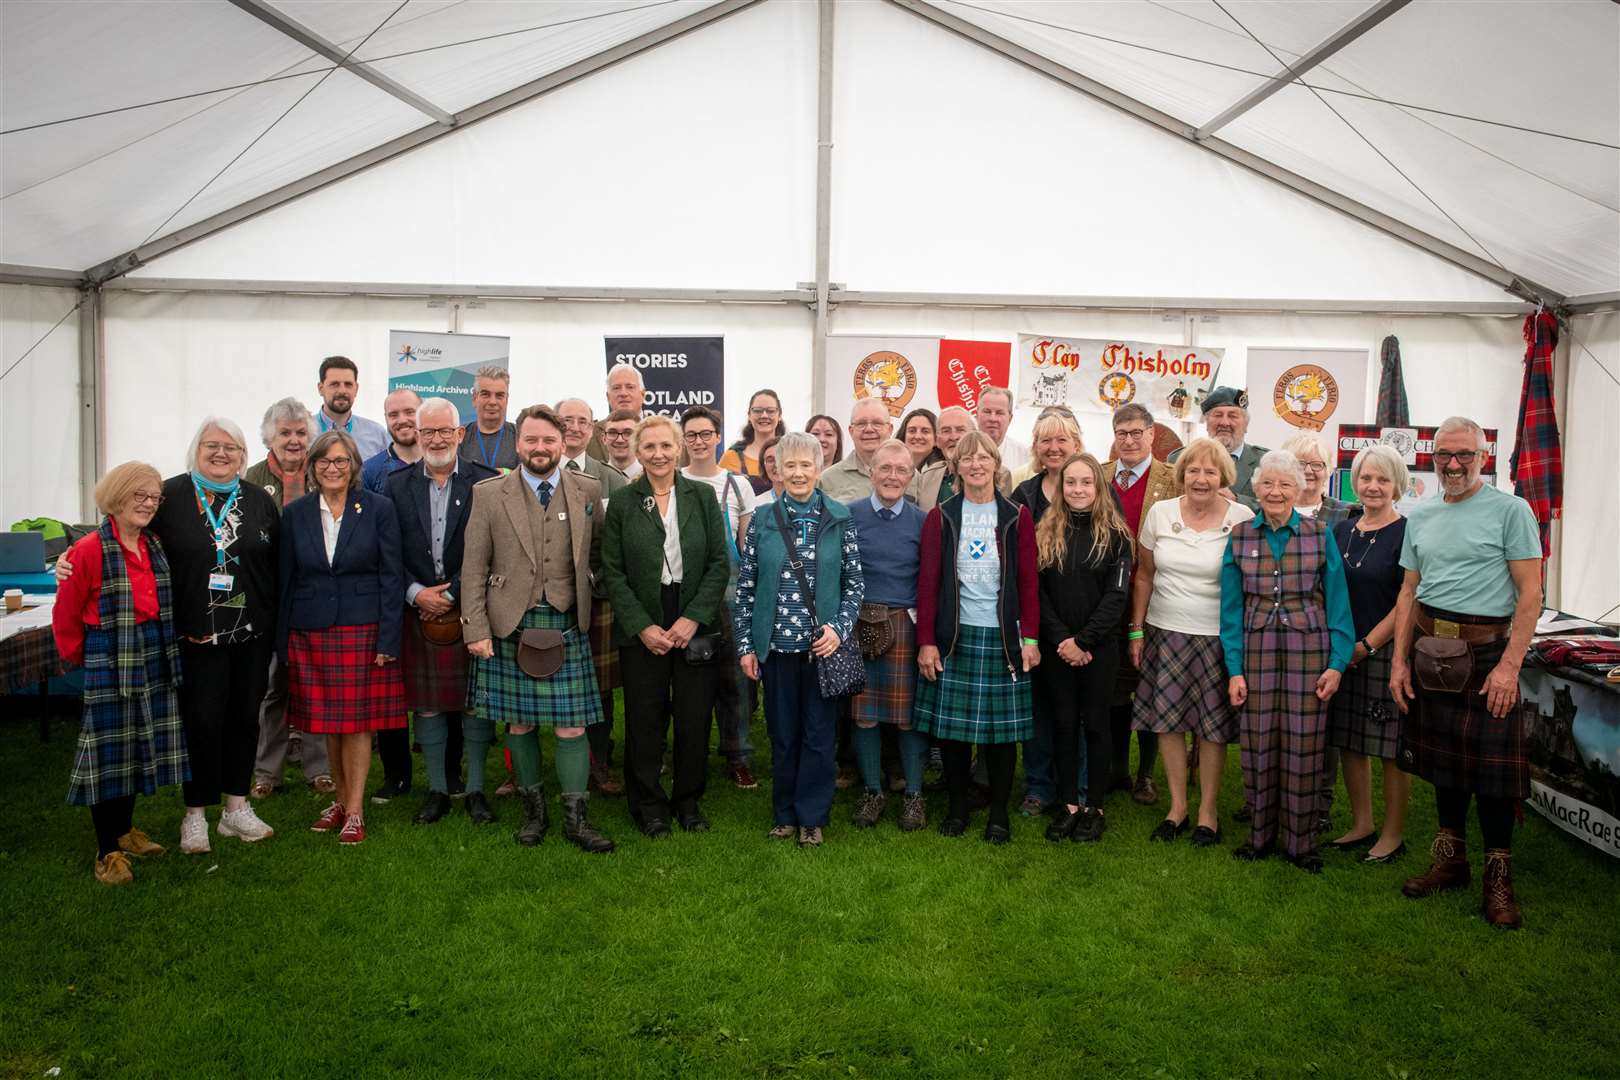 All the clans involved in the heritage Tent. Picture: Callum Mackay